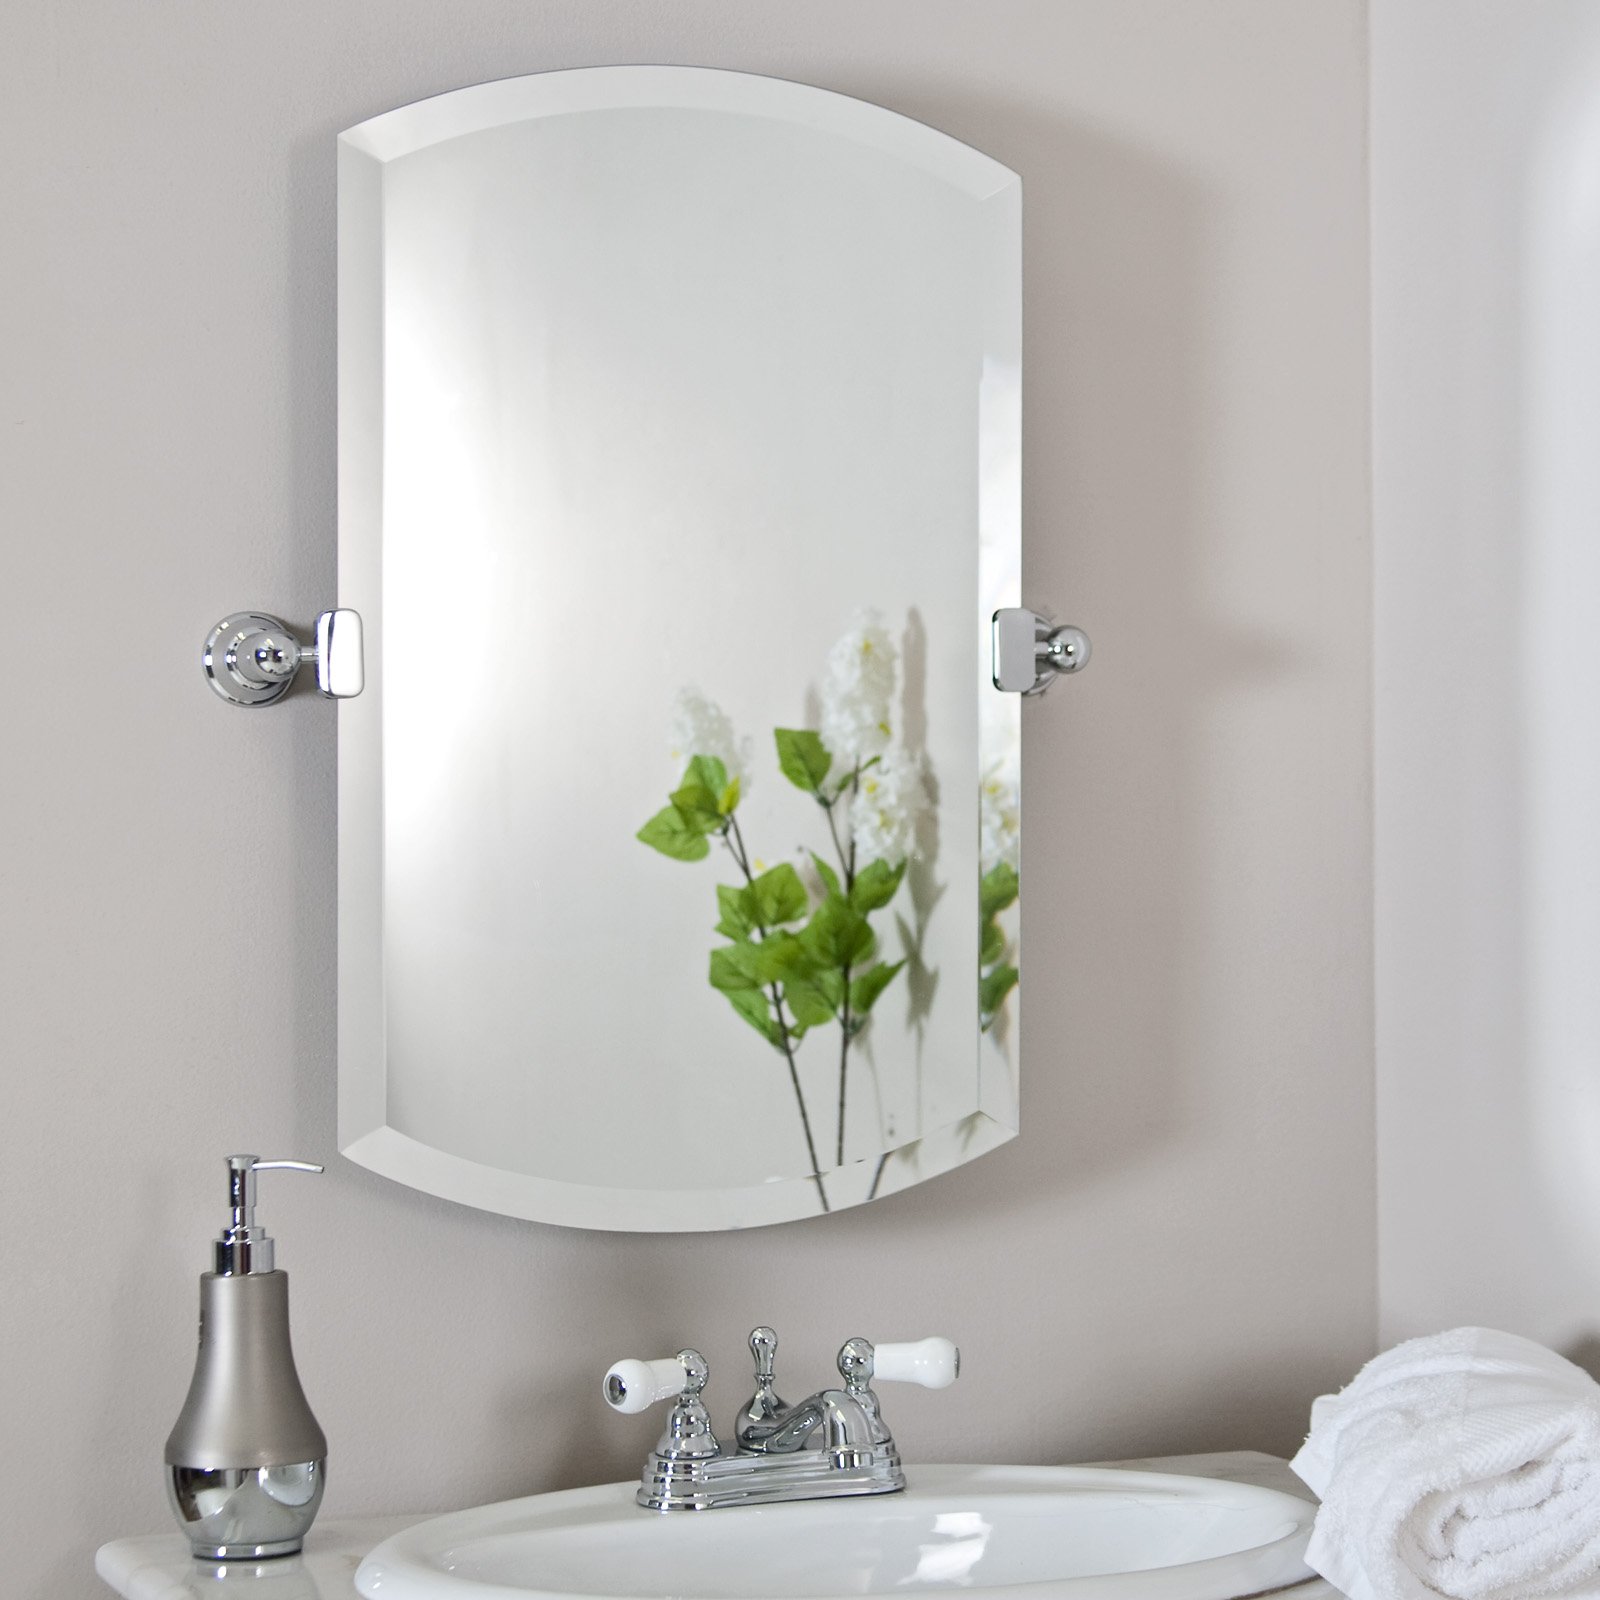 Framing mirrors in bathroom large and beautiful photos to